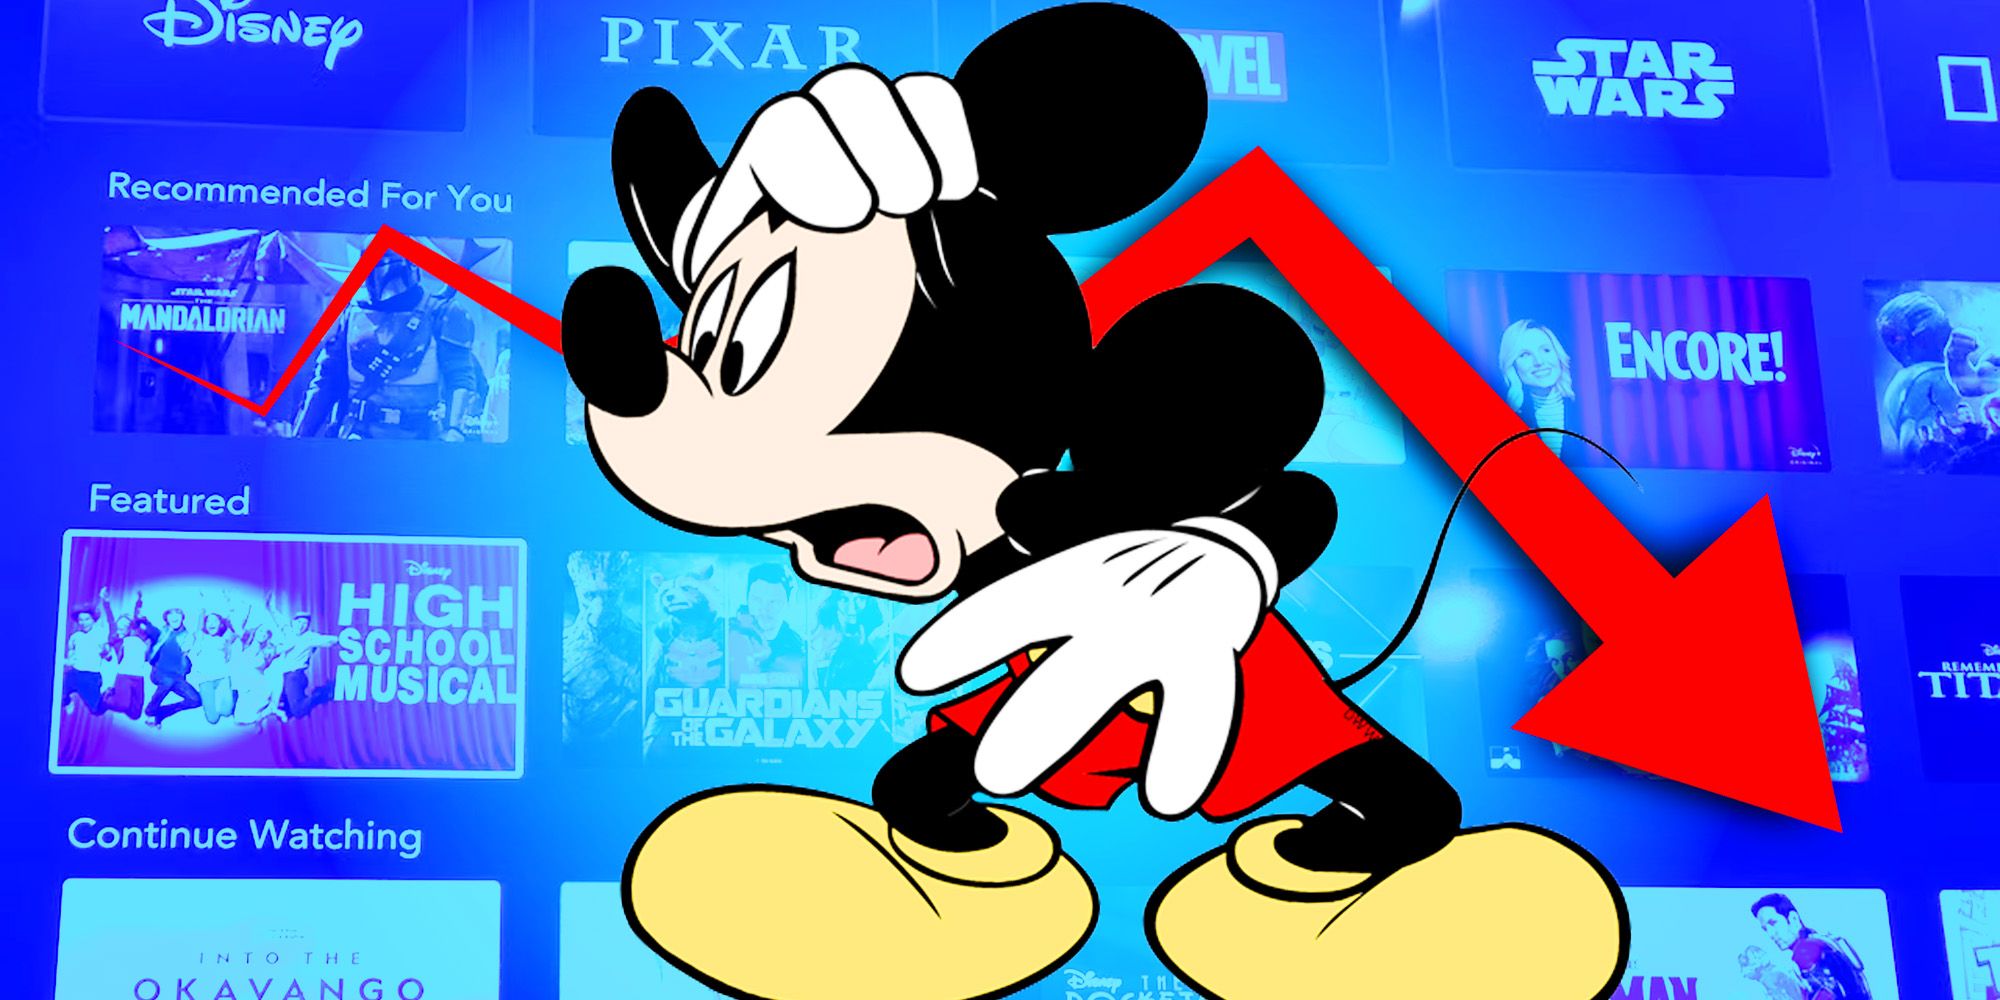 Mickey Mouse looking scared with a downward arrow